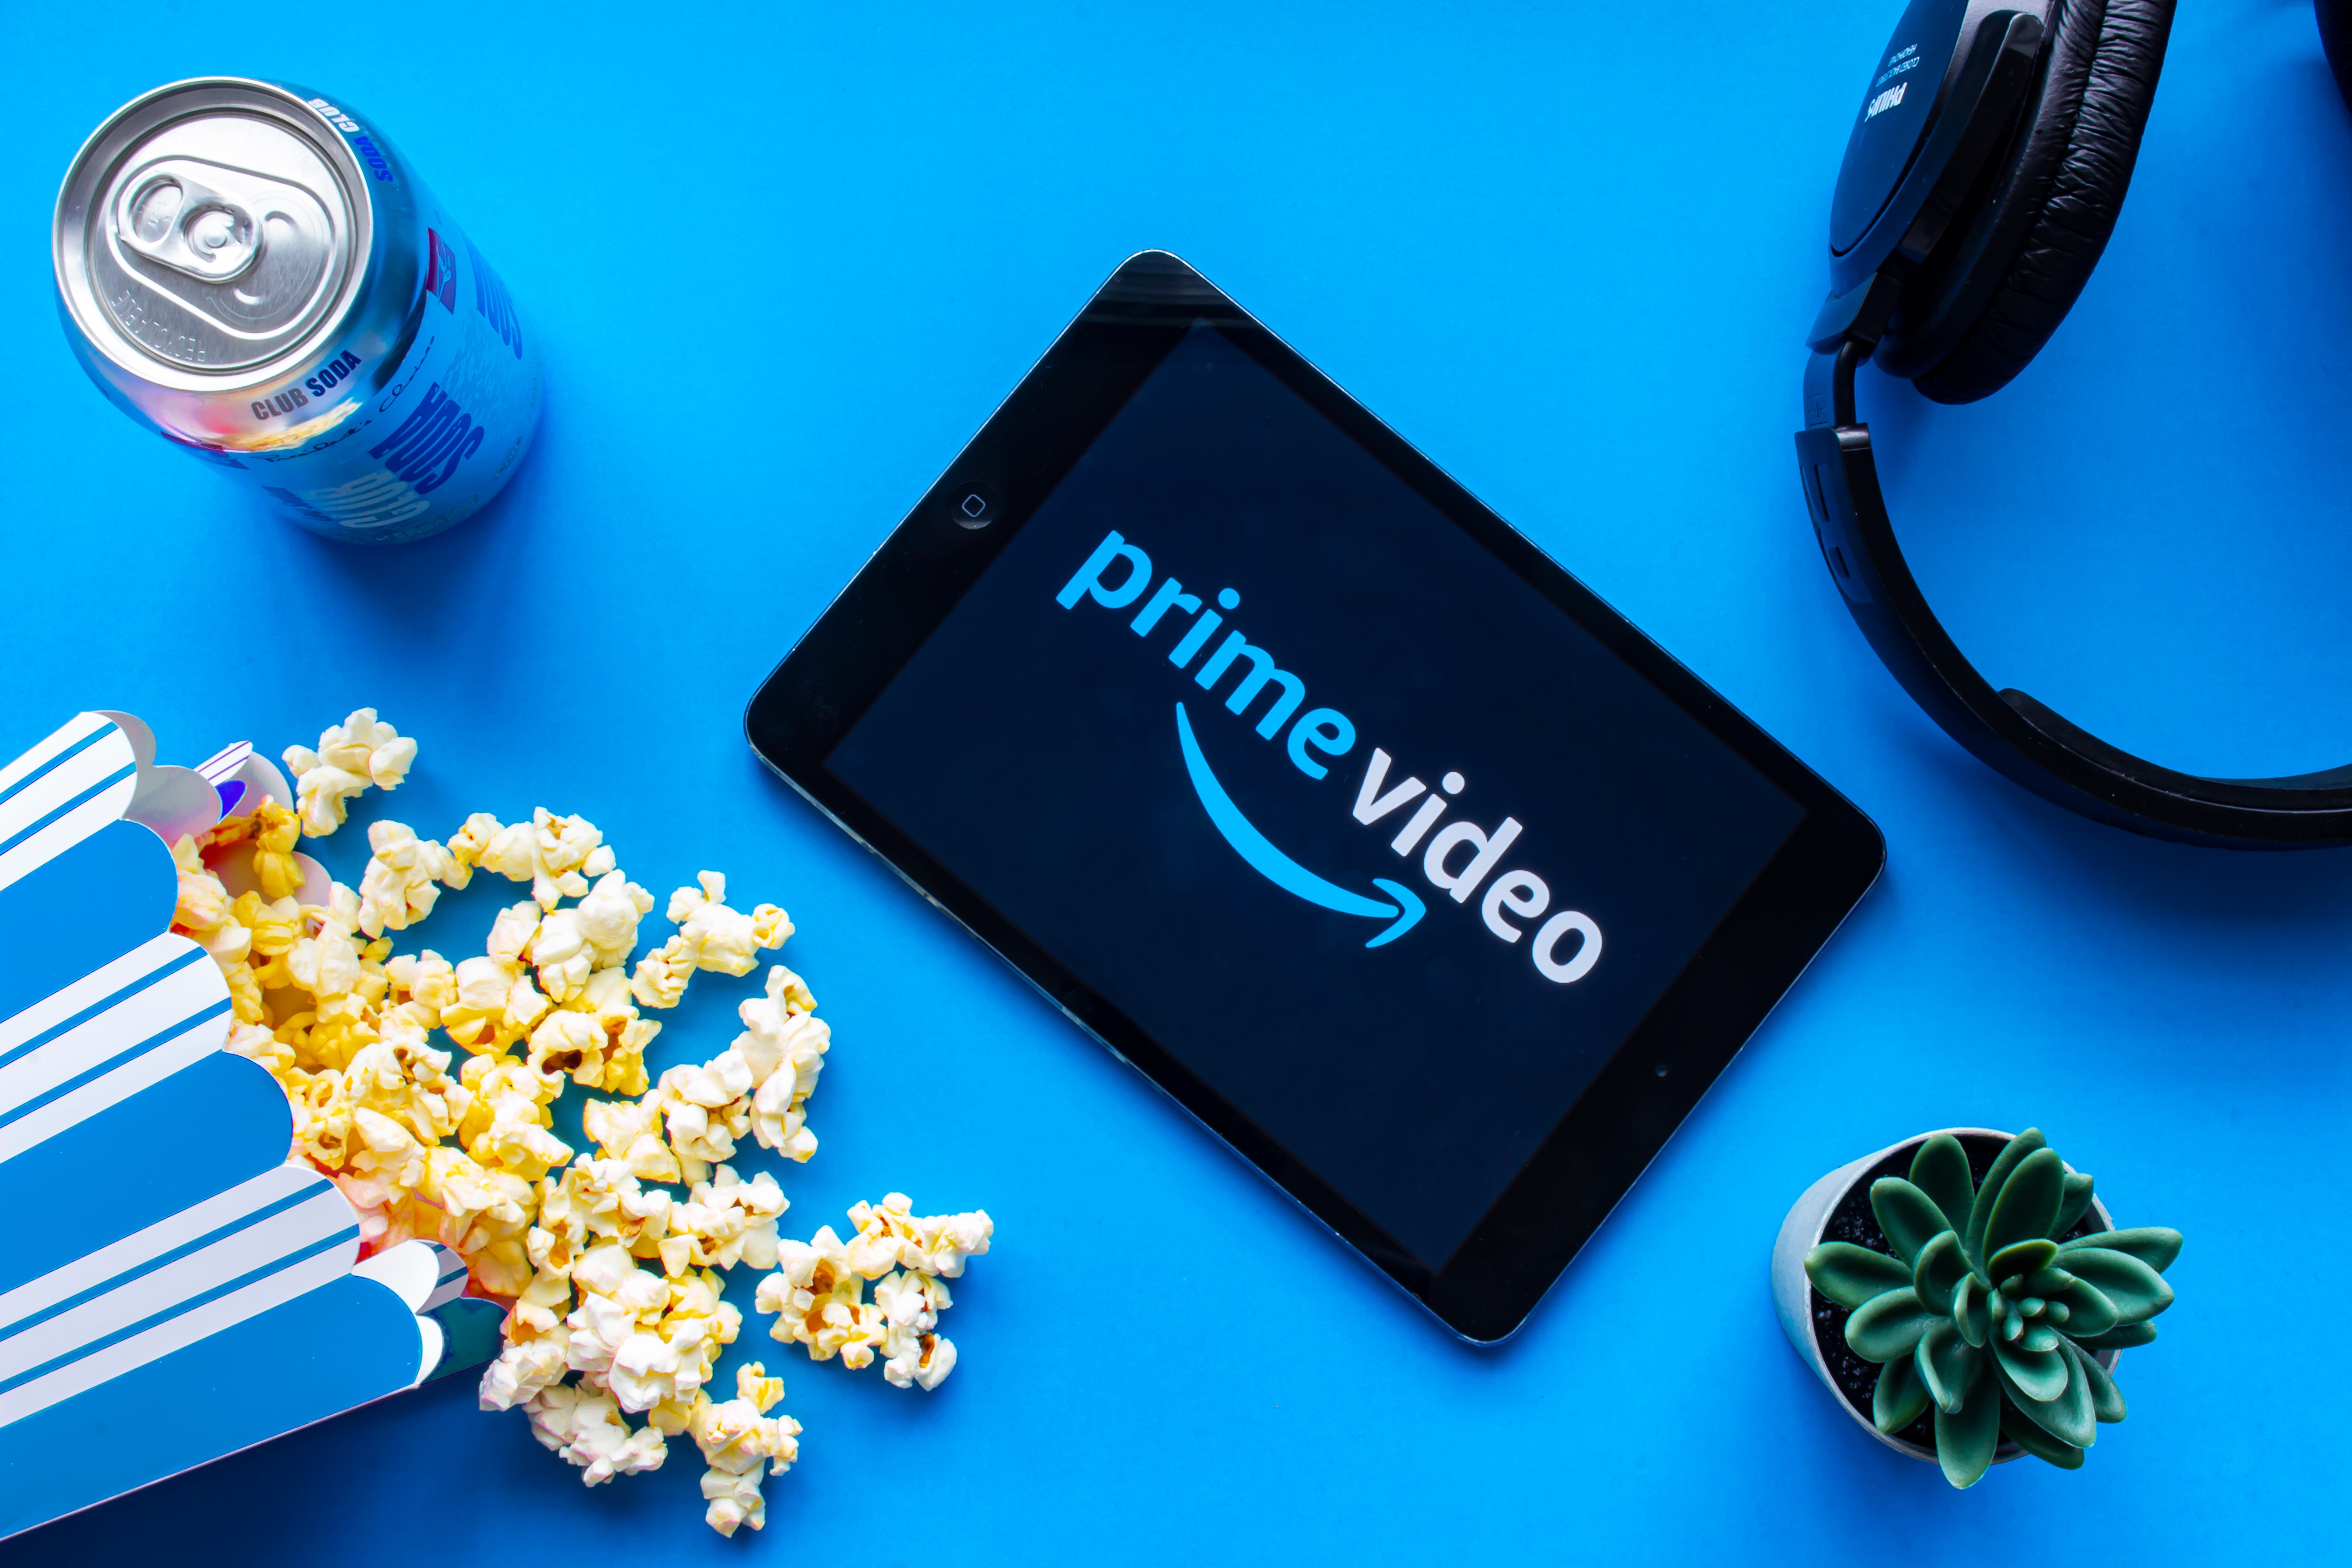 Amazon’s Prime Video Now Includes Ads Unless You Pay More – Here is Everything You Need to Know